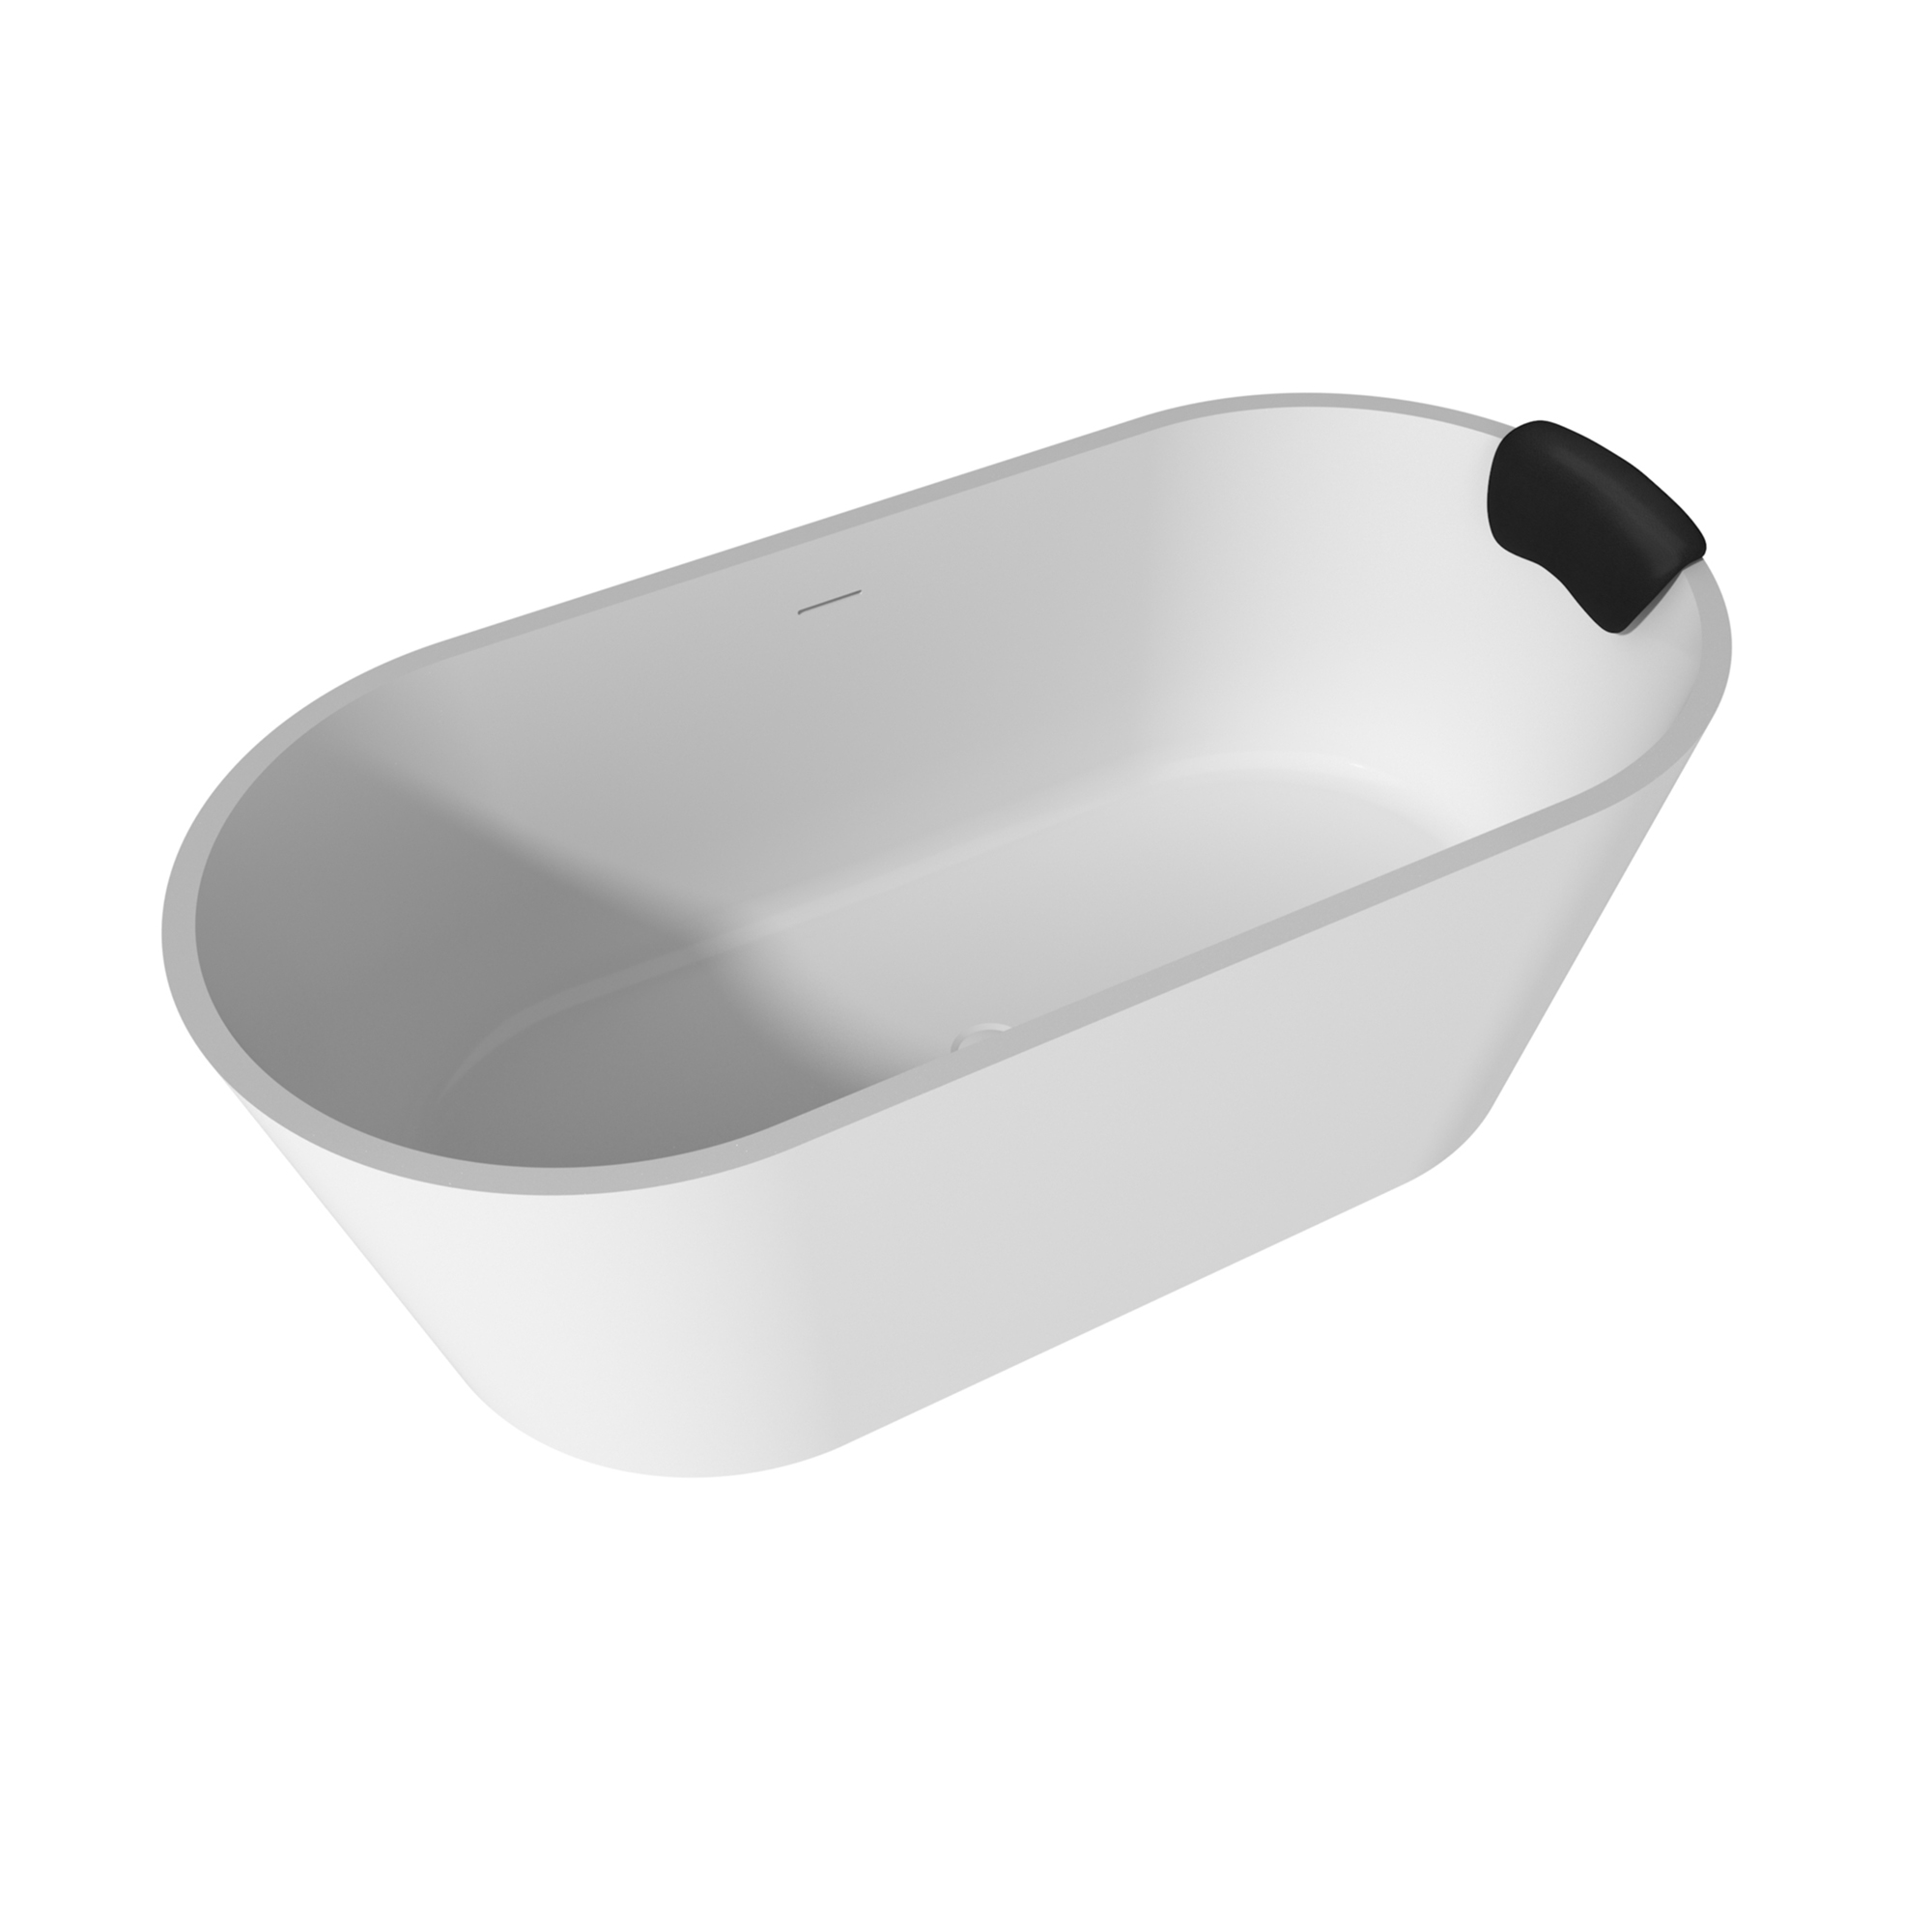 59/67" Matte White Solid Surface Adult Freestanding Soaking Tub with Cushions and Drain Assembly, Contemporary Curved Design for Non Porous Surface Resin Bathtubs, High Quality Construction For Retaining Heat in Your New Bathroom